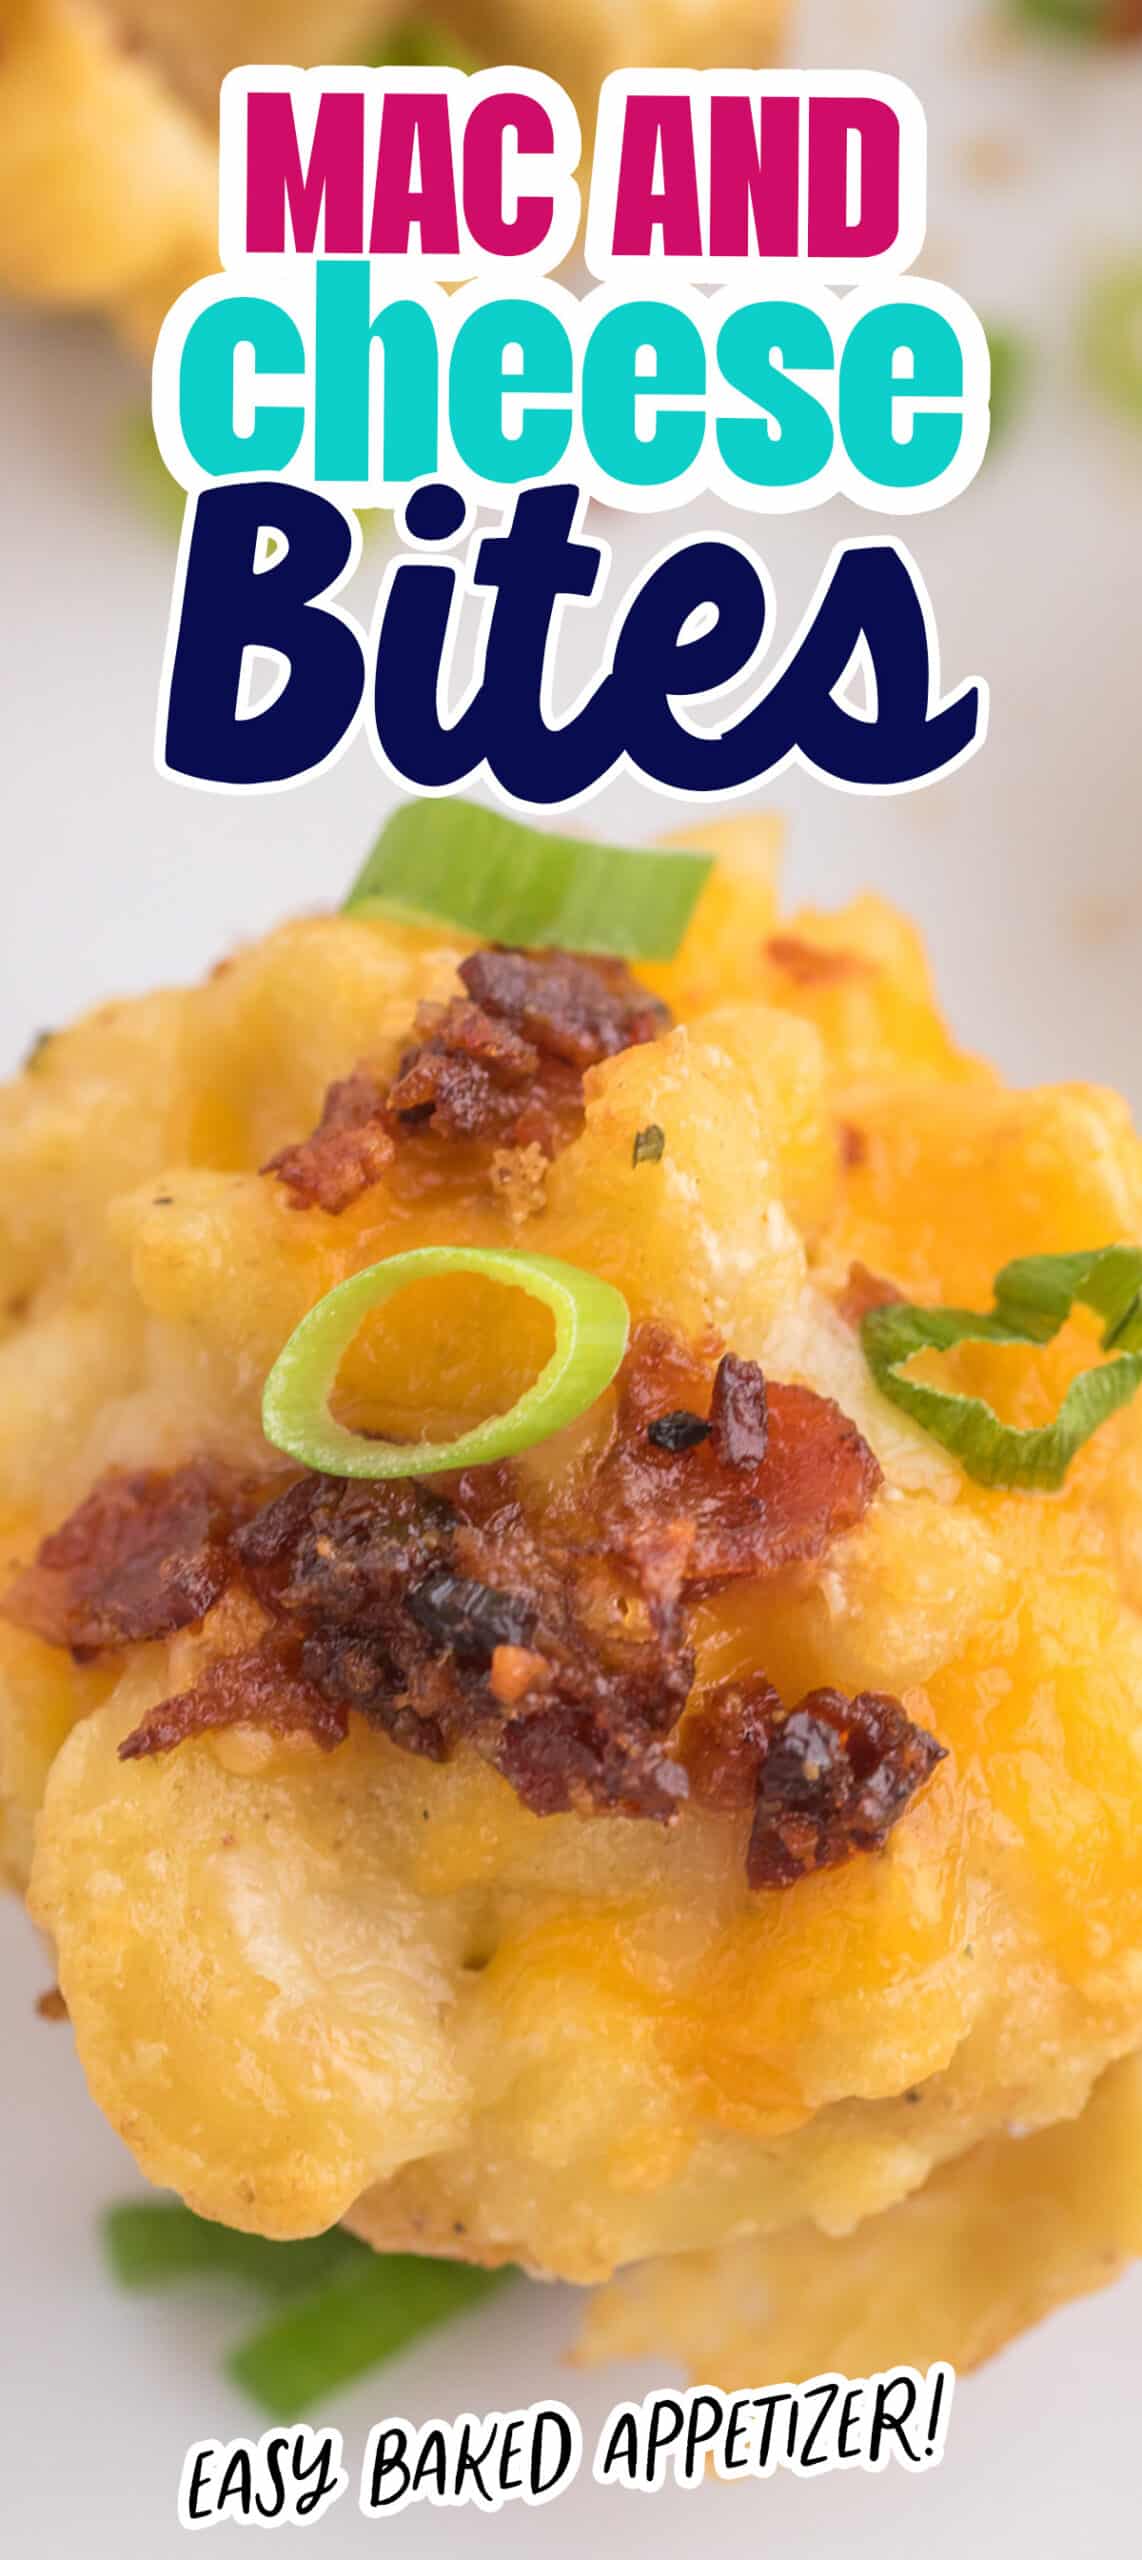 Mac and cheese bites: a delightful, cheesy appetizer that is incredibly easy to make.